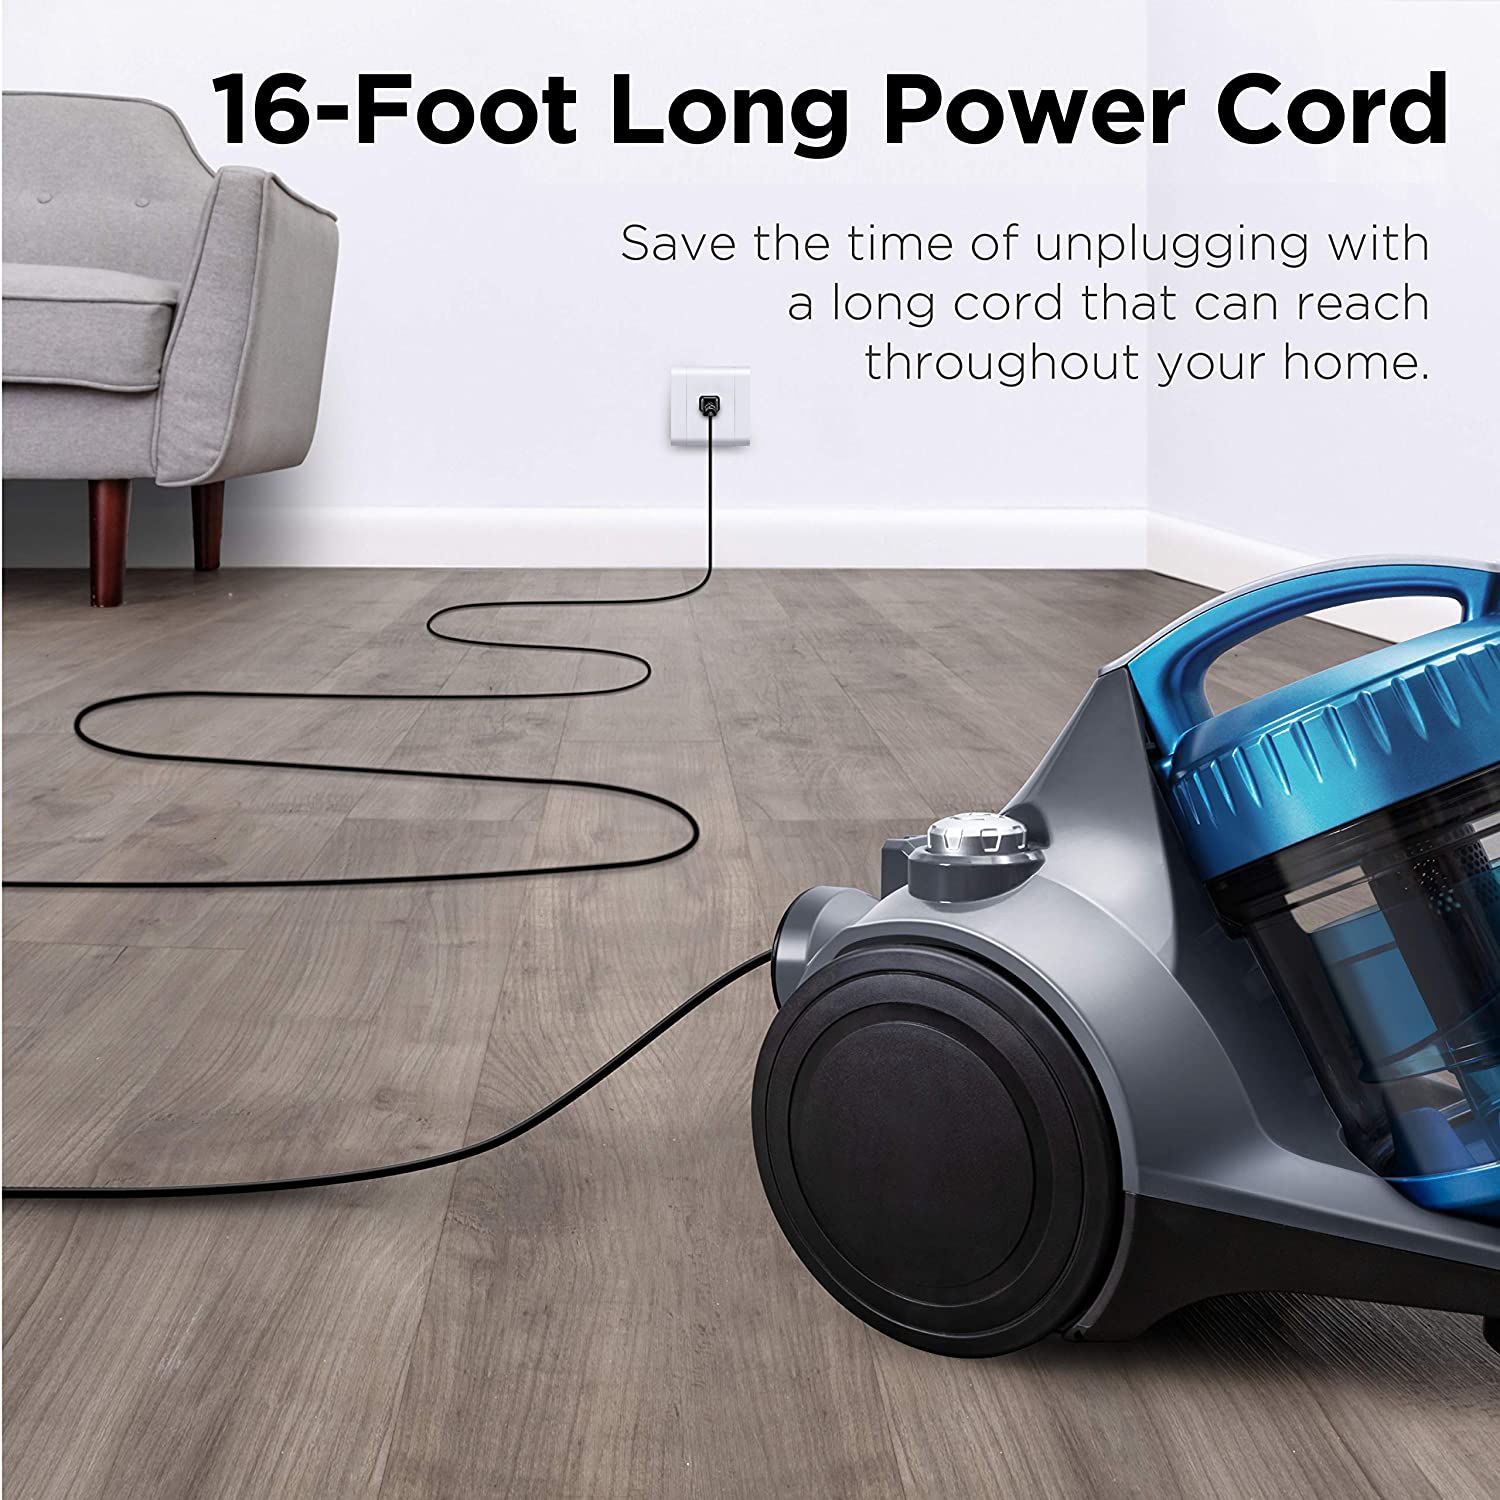 Eureka NEN110A Bagless Canister Vacuum Cleaner, Lightweight Corded Vacuum for Carpets and Hard Floors, Blue - image 4 of 5